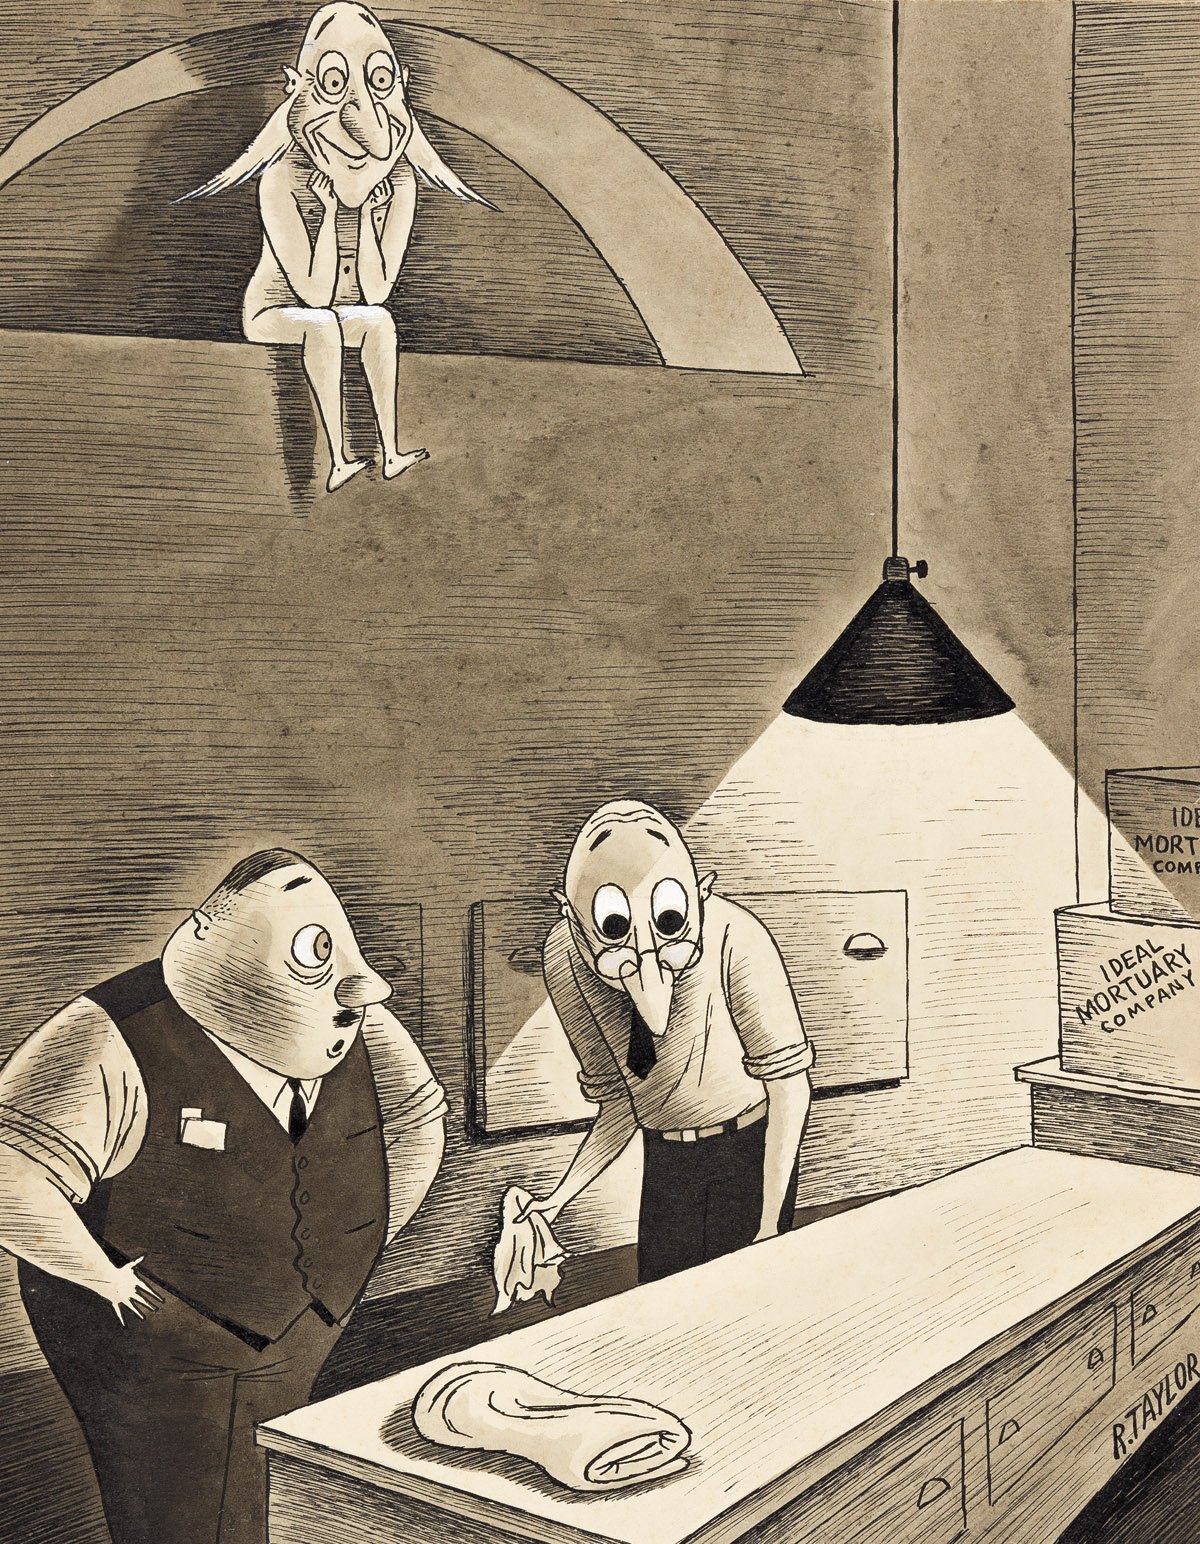 RICHARD TAYLOR (1902-1970) [CARTOONS / NEW YORKER CARTOONIST] Its never happened before in the history of the ideal mortuary. * Jus